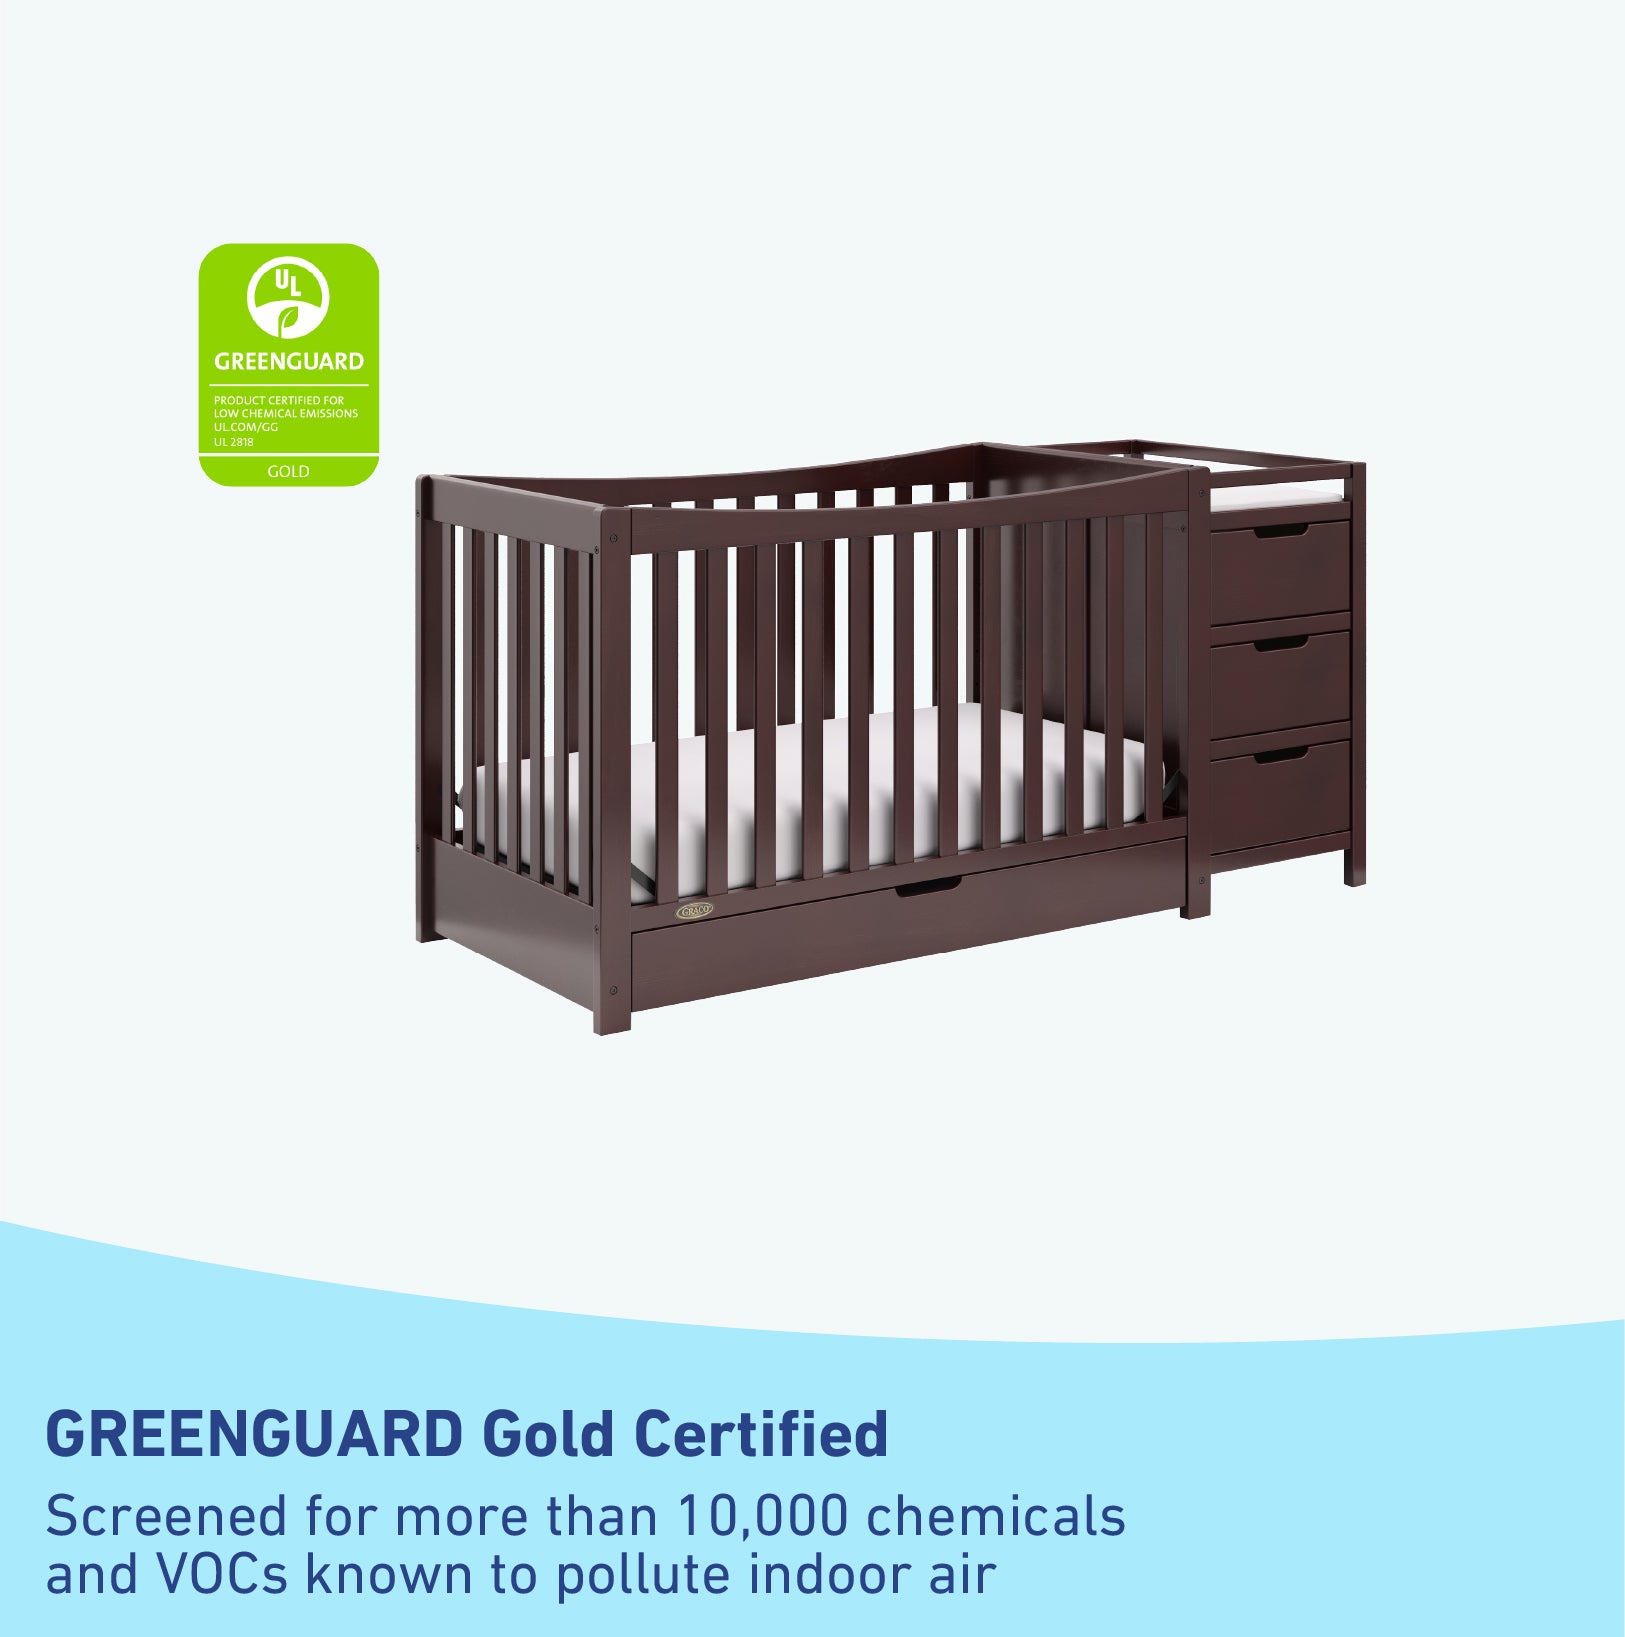 GREENGUARD Gold Certified espresso crib and changer